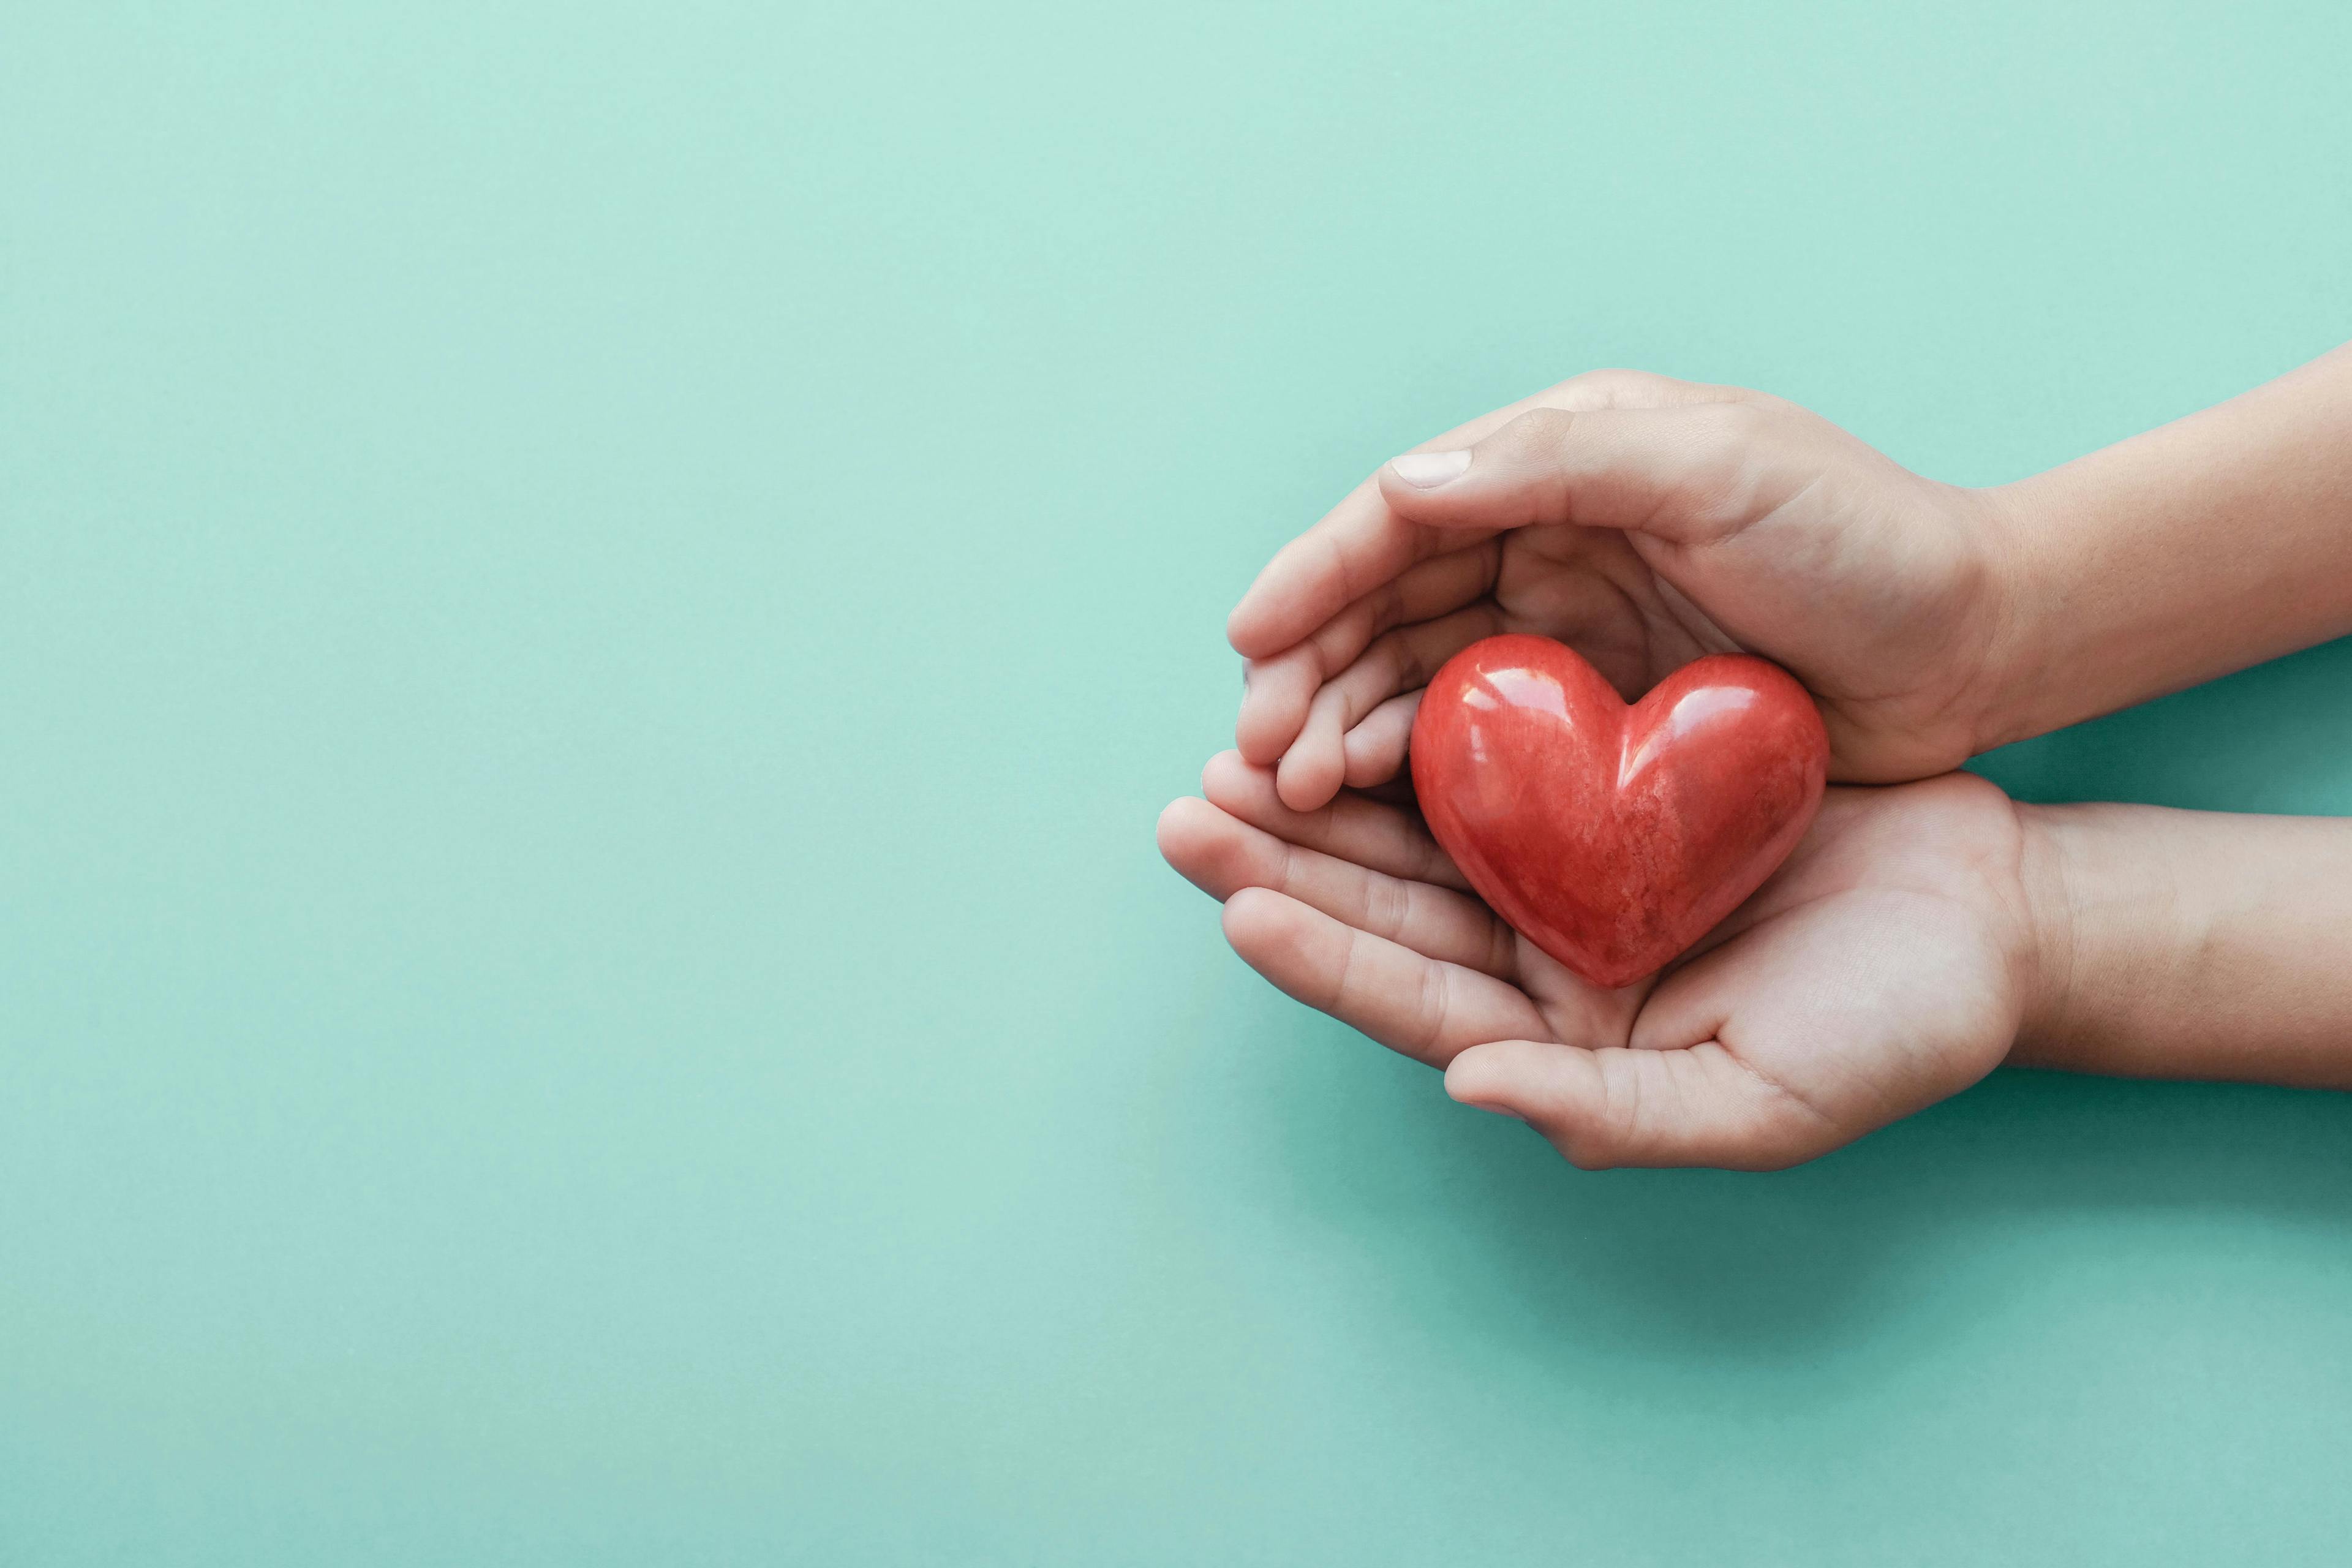 hands holding red heart, health care, love, organ donation, wellbeing family insurance,CSR concept, world heart day, world health day, hope, gratitude, praying concept  | Image credit © sewcream - stock.adobe.com